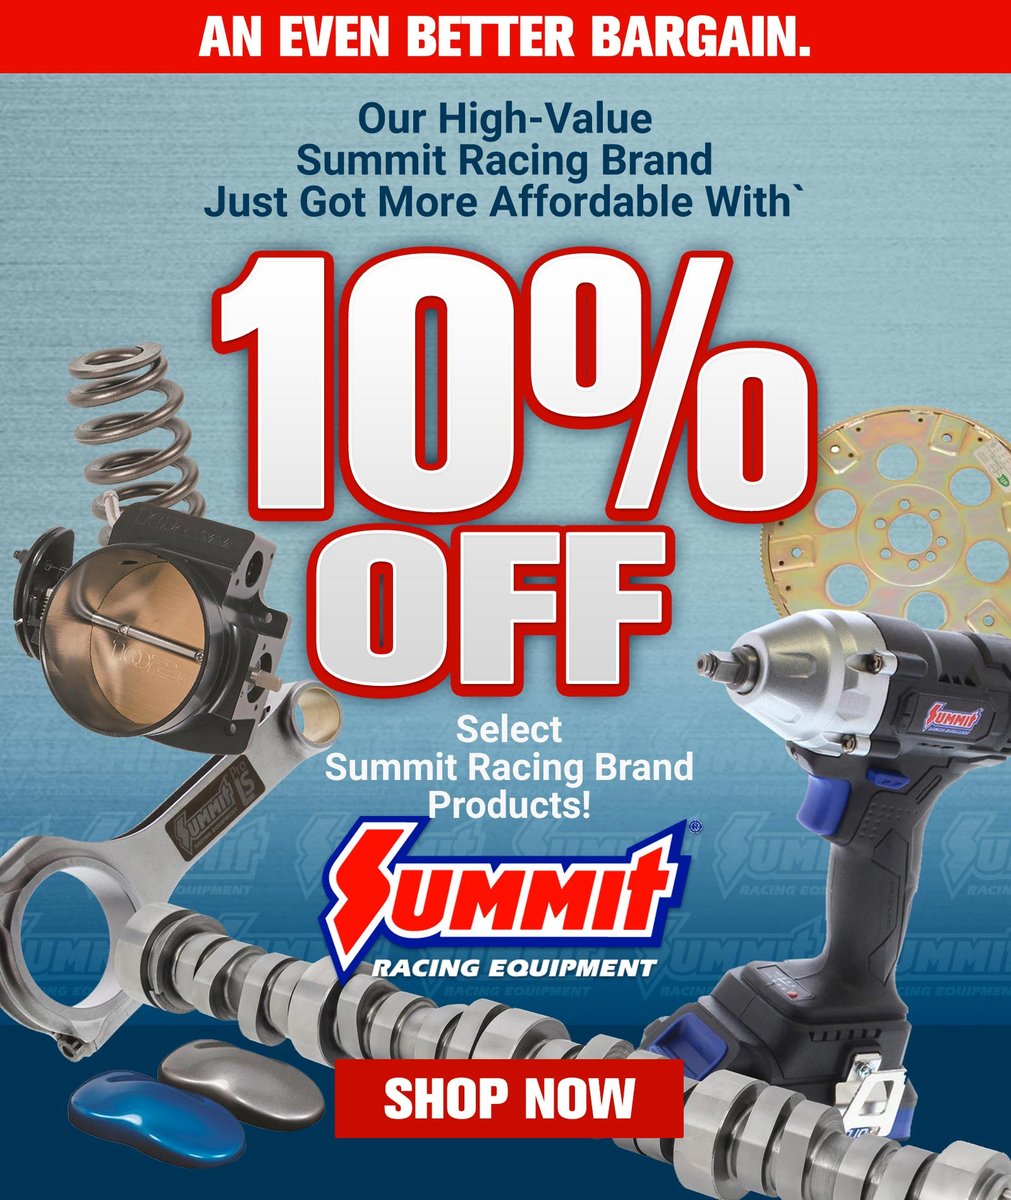 Get 10% off select Summit Racing Brand products! Shop now at summitracing.com/redirect?banne… Offer ends 5/5 at 11:59pm. #WKA #WorldKarting #WorldKartingAssociation #Karting #Kart #LetsGoKarting #MoreKarting #Racing #Motorsport #Community #Sponsor #SummitRacing #SummitRacingEquipment